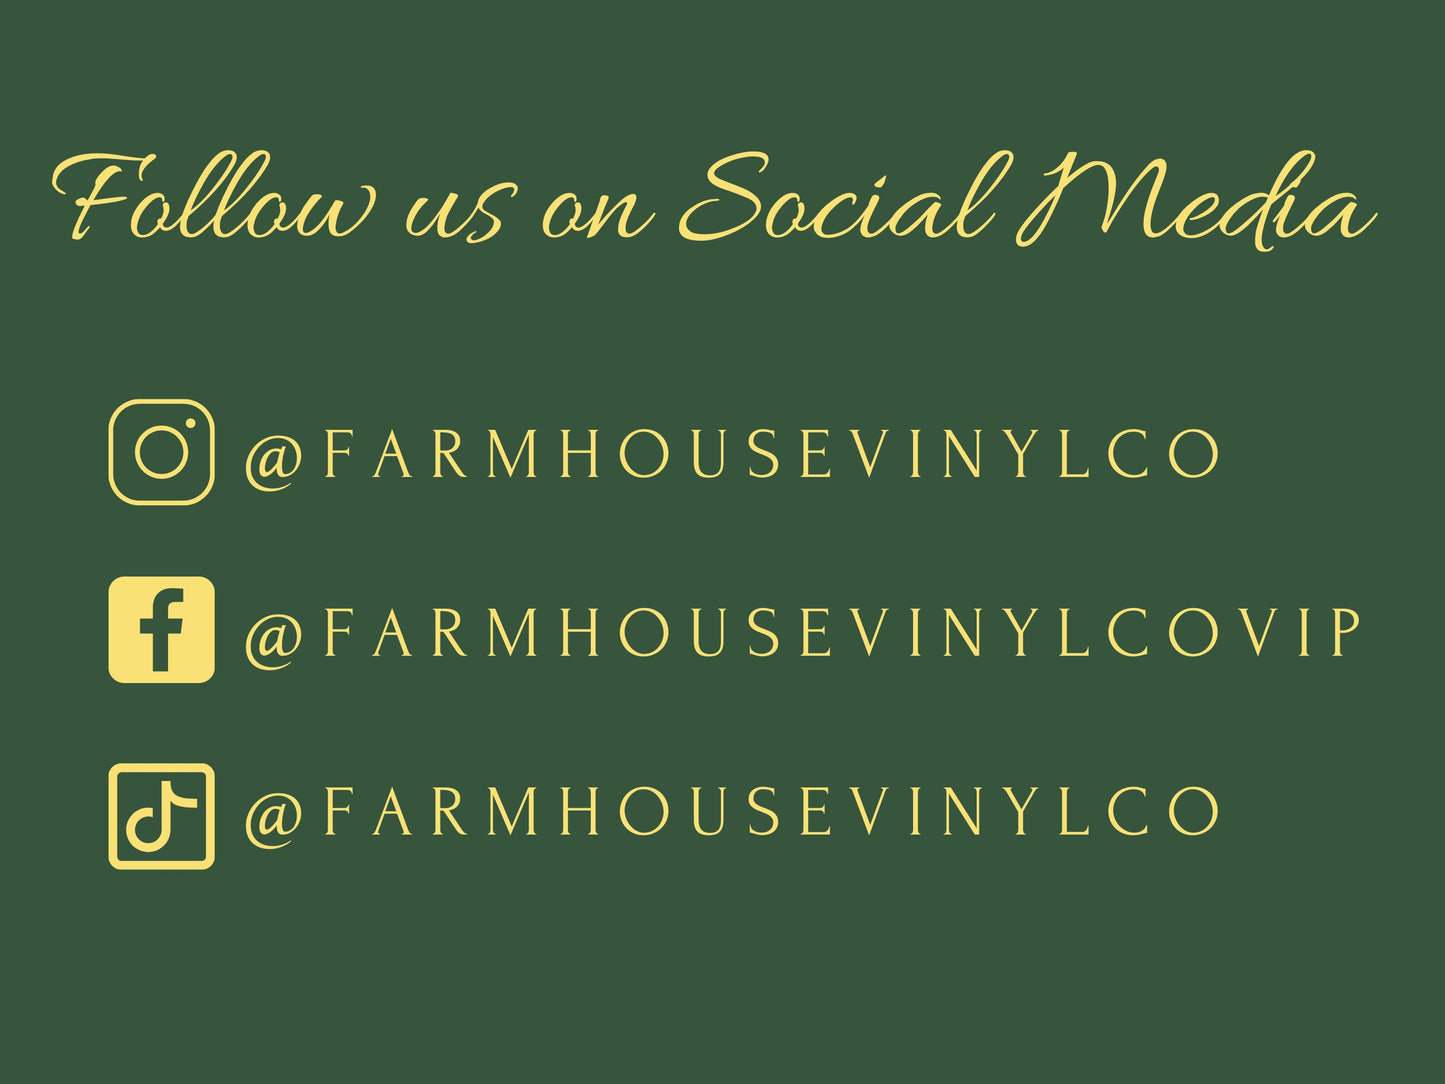 Ready To Press, Sublimation Transfers, DIY Shirt, Sublimation, Transfers Ready To Press, Heat Transfer Designs, All You Need is Love, VDay - Farmhouse Vinyl Co